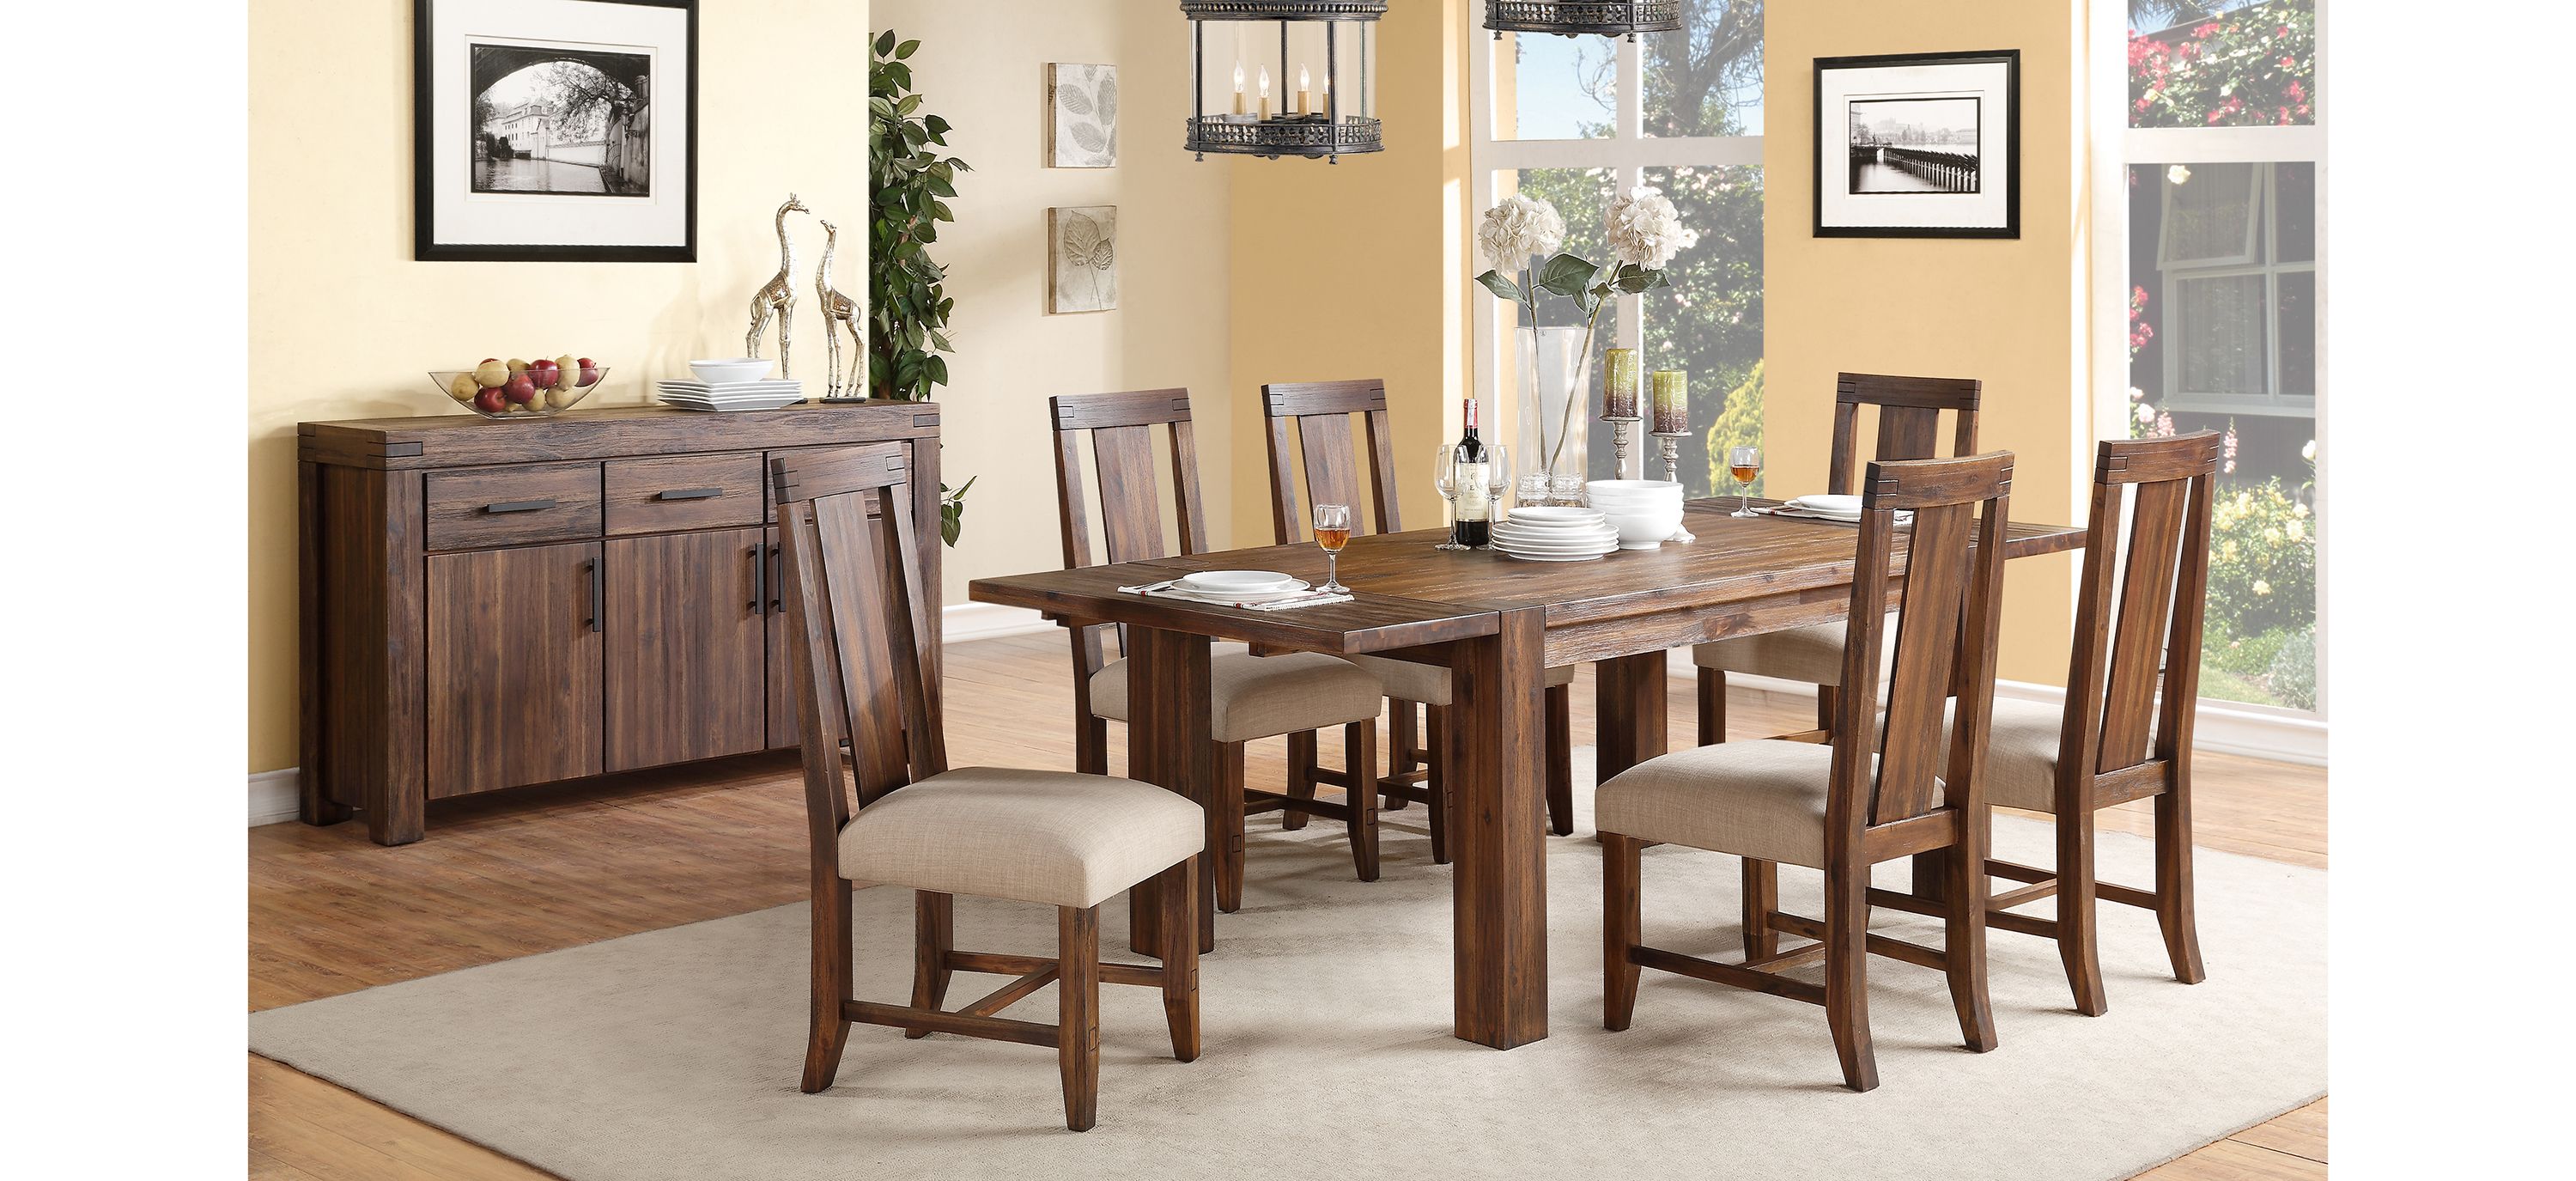 Middlefield 7-pc. Dining Set w/ Upholstered Chairs